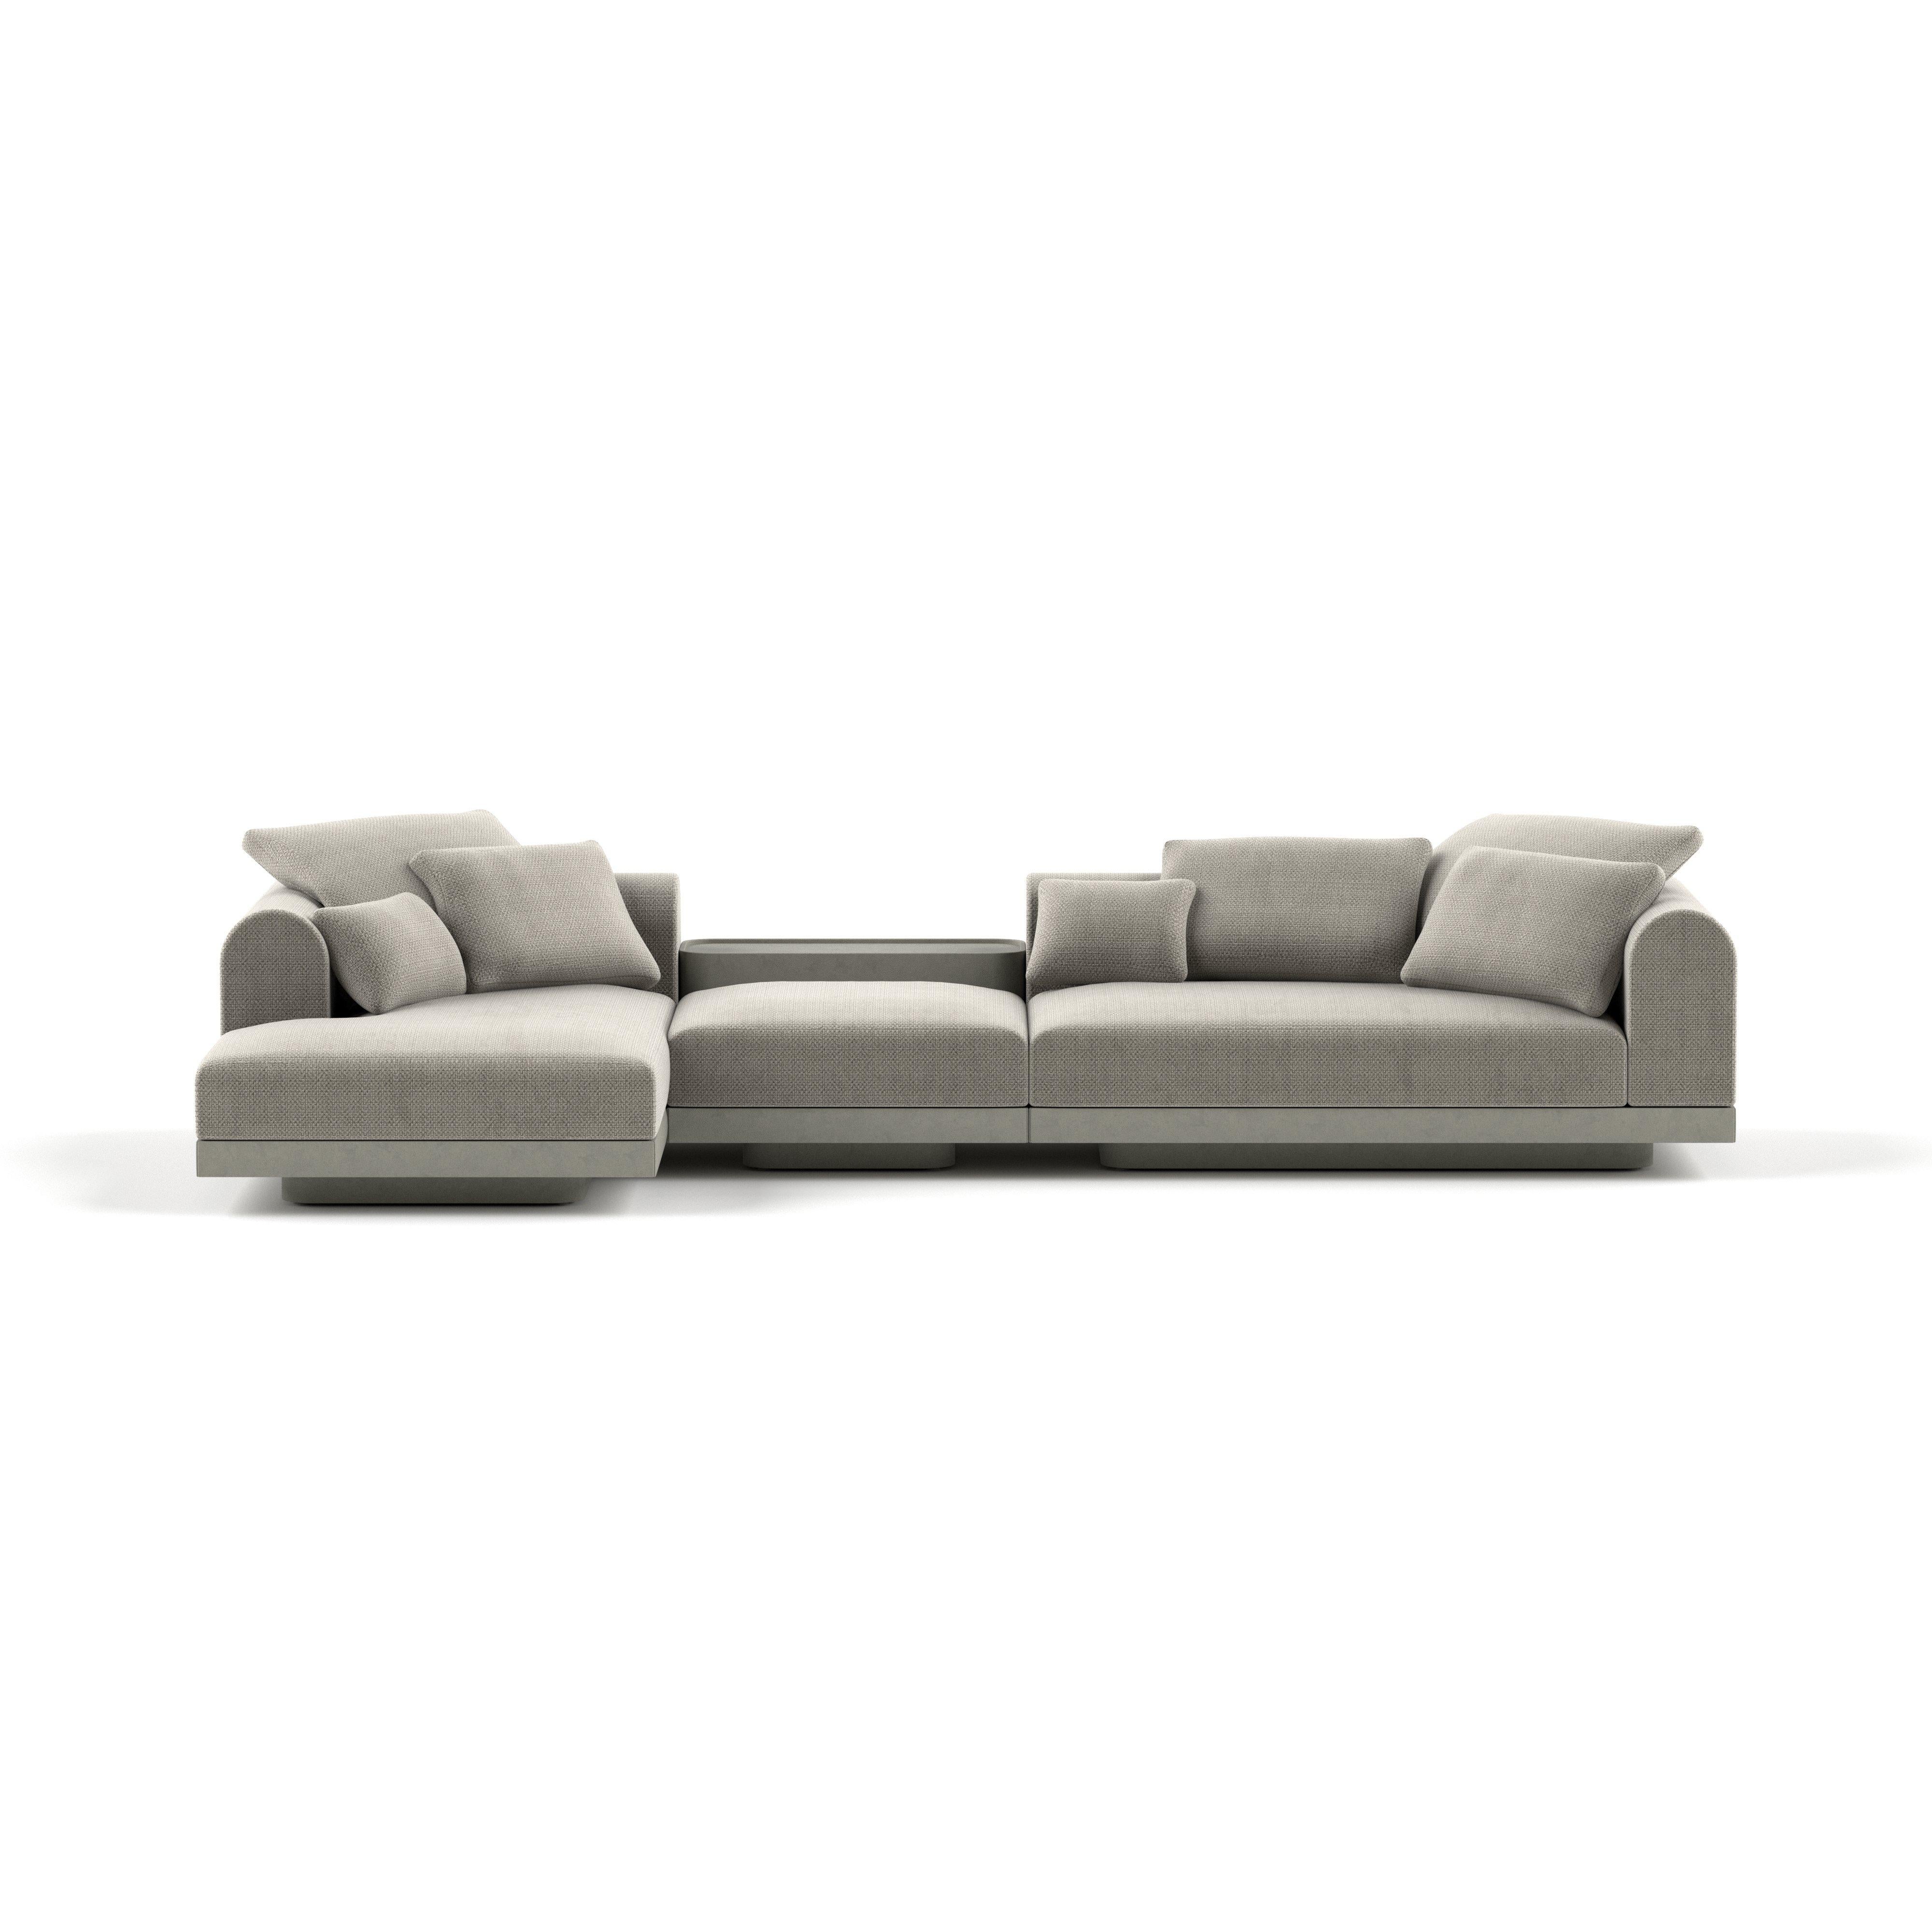 'Aqueduct' Contemporary Sofa by Poiat, Setup 3, Yang 95, High Plinth For Sale 3